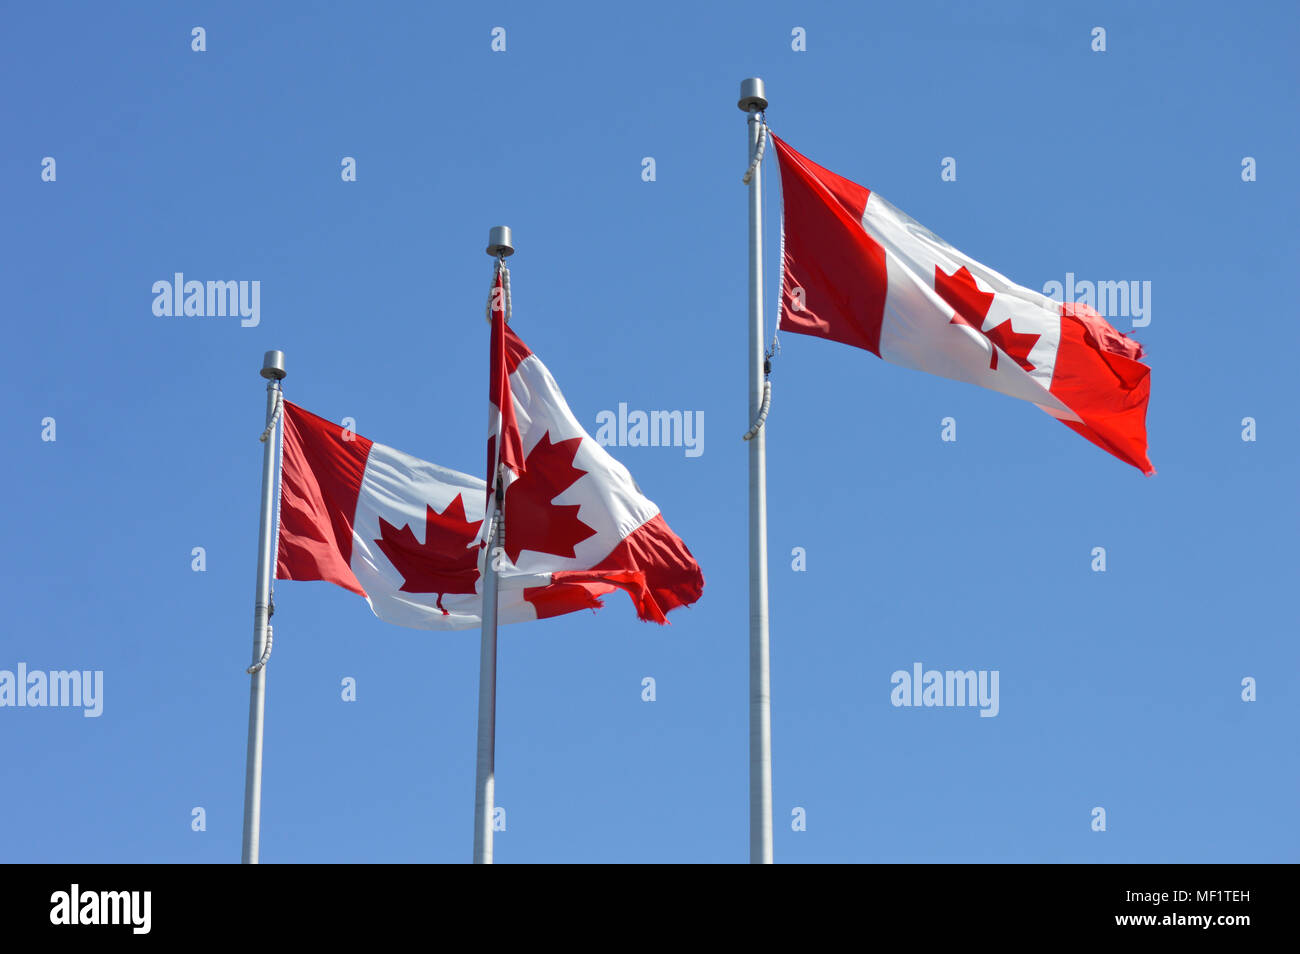 3 Canadian flags flying in a light breeze with ripped edges Stock Photo